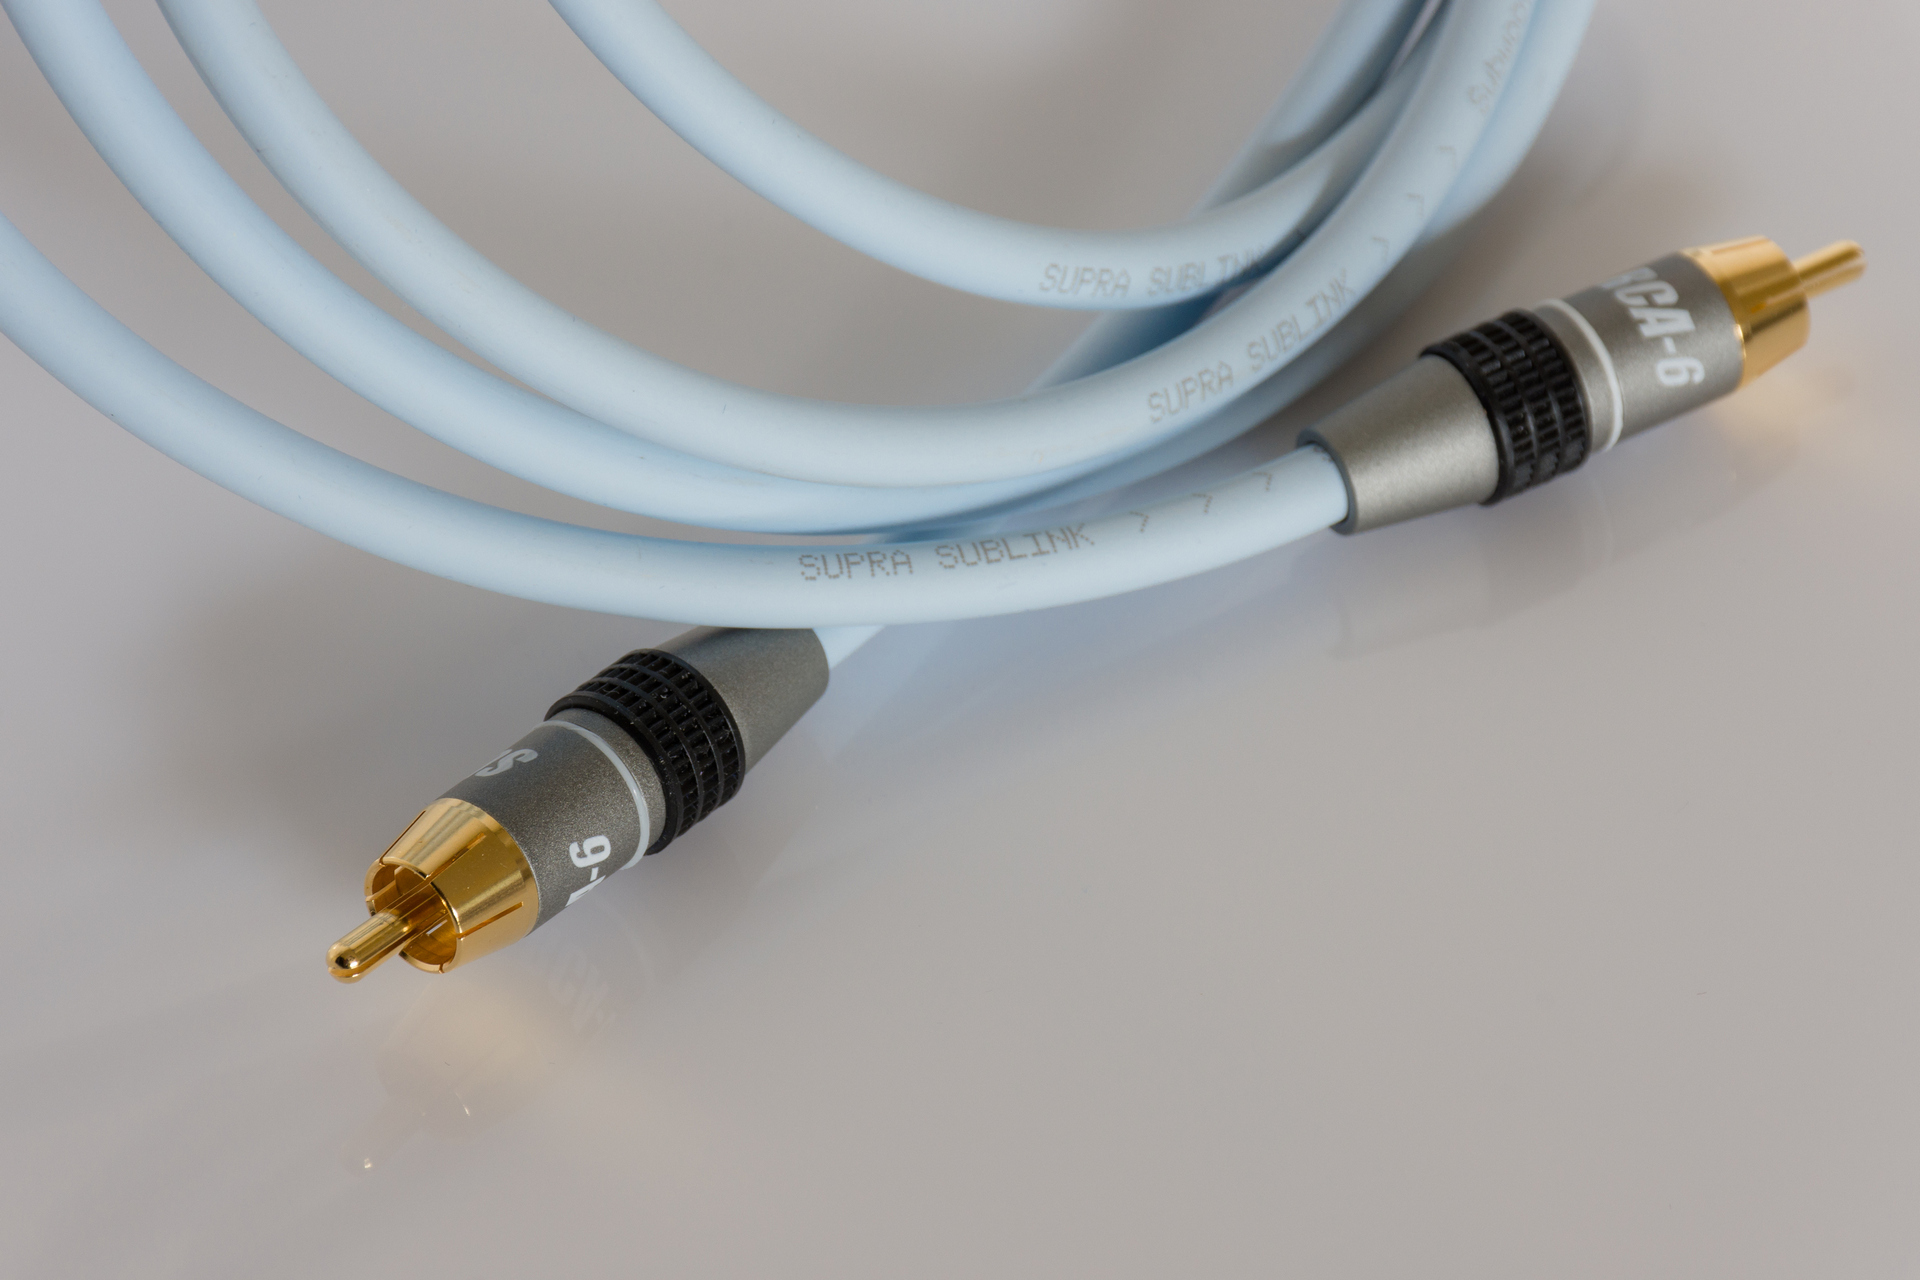 Supra Cables SubLink RCA Mono Subwooferkabel in 2m Länge Neuware 